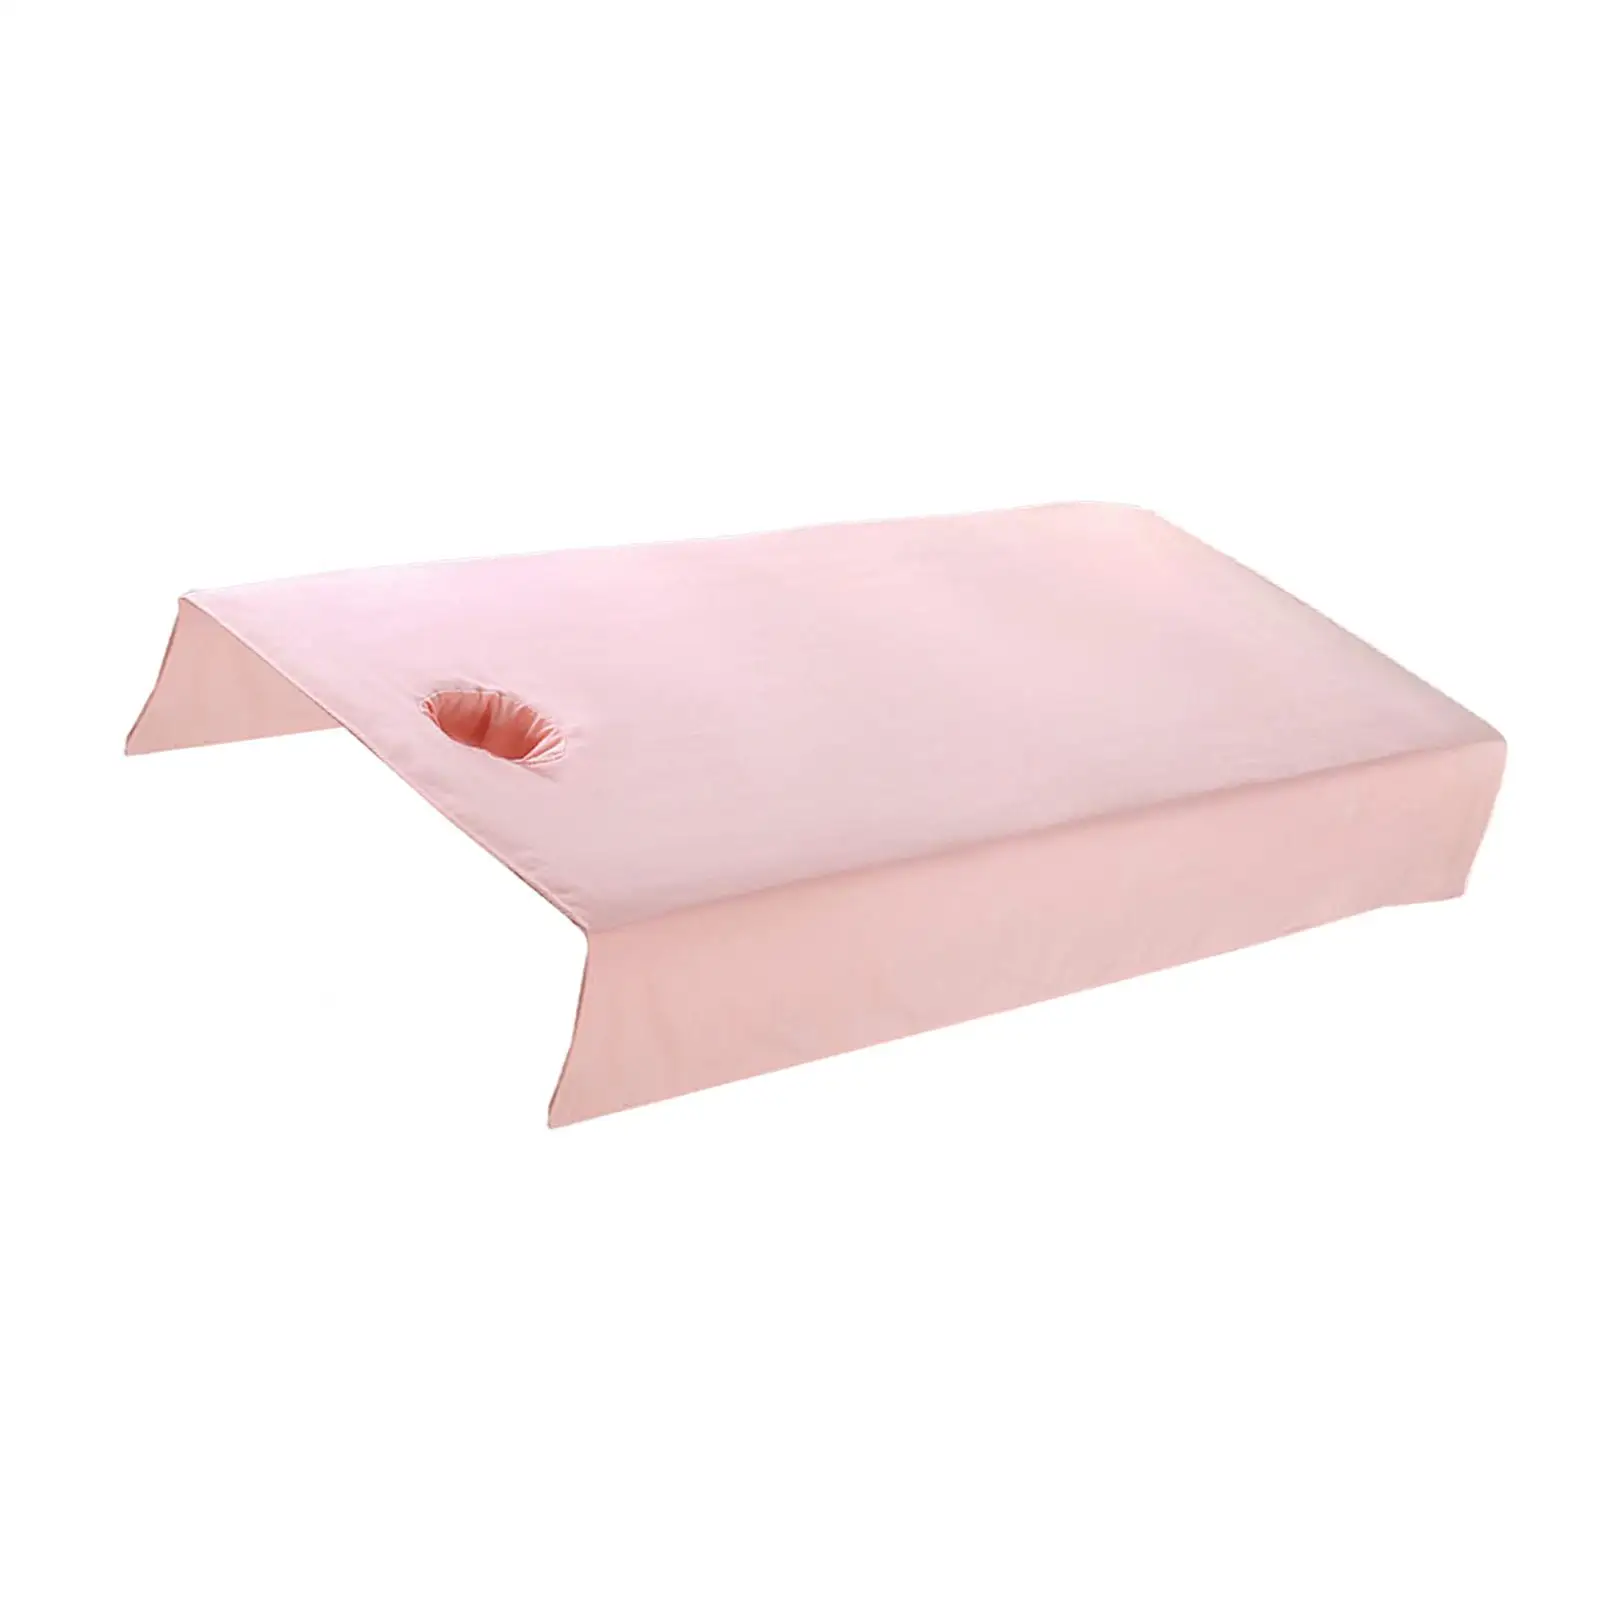 SPA Massage Bed Cover Sheet Protector with Face Hole 80x200cm Accessories Wrap for Home or Hotel